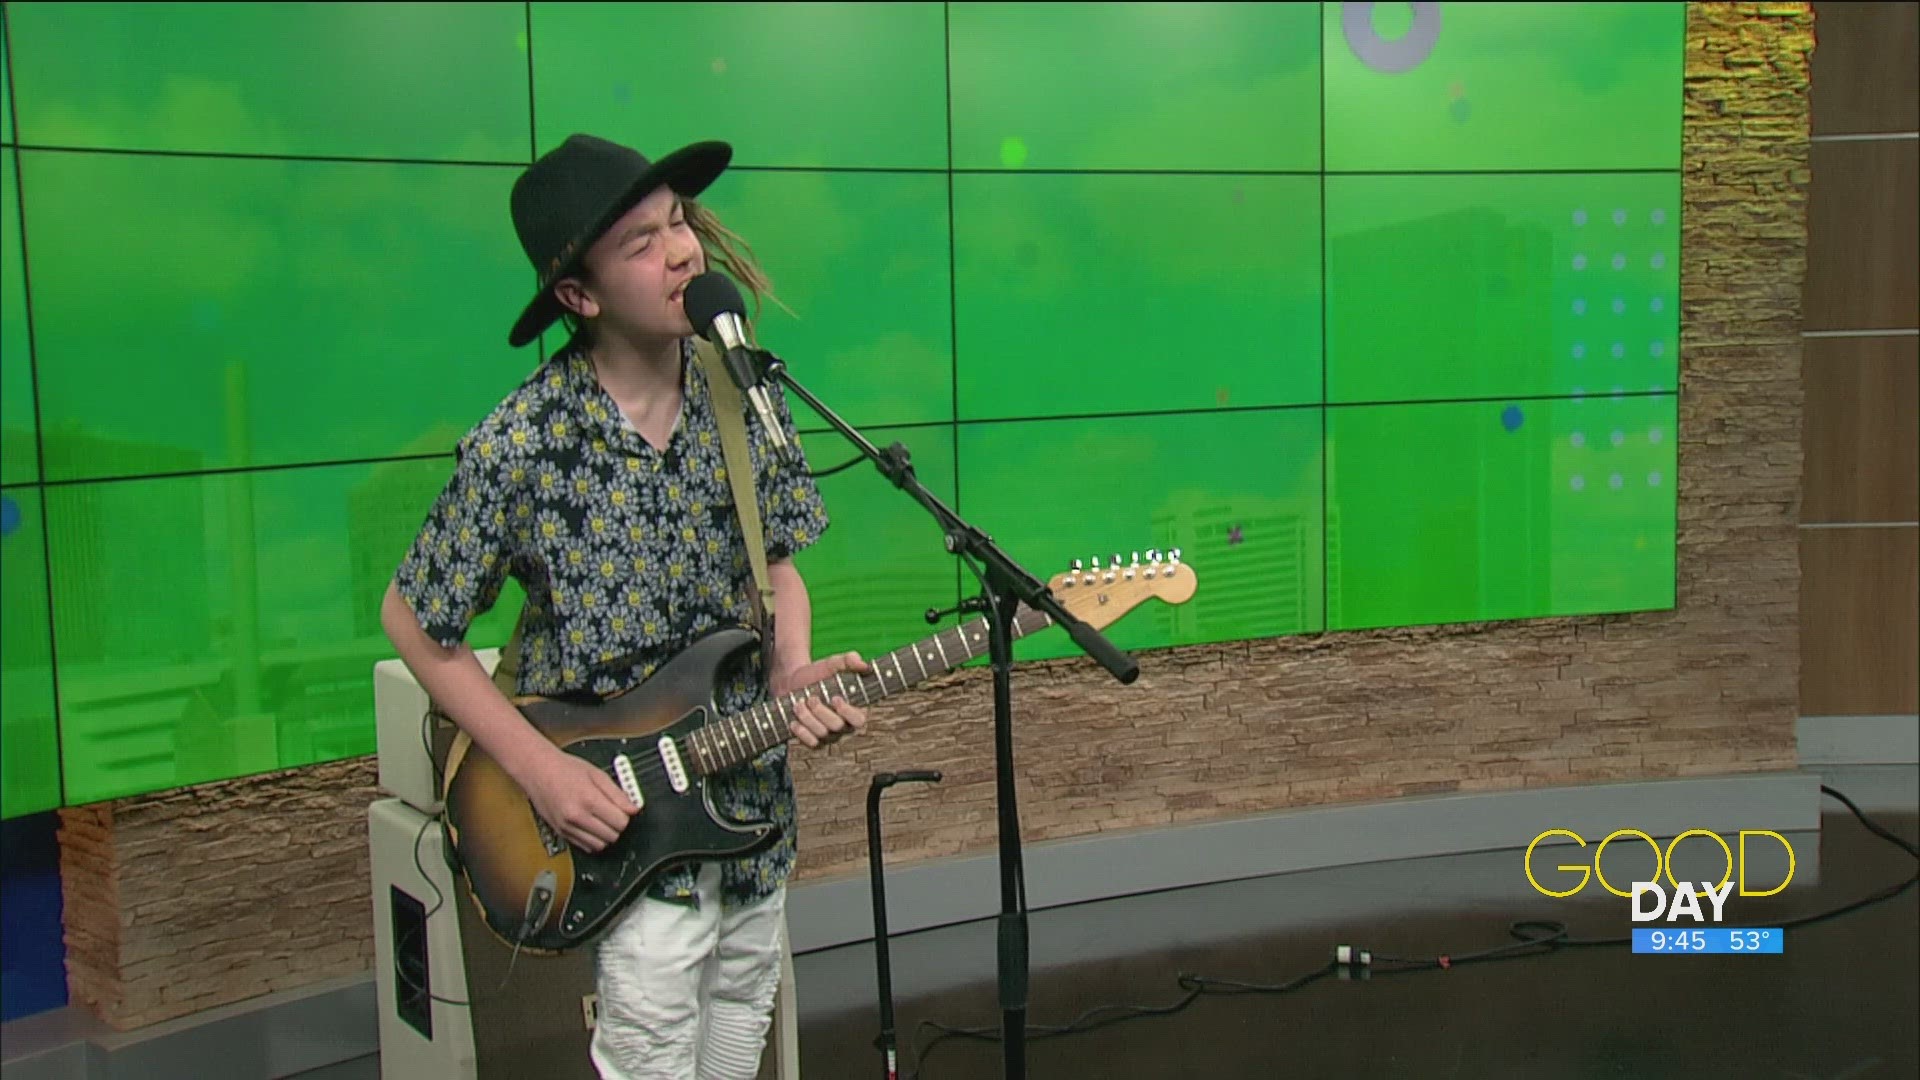 13-year-old Australian guitarist Taj Farrant talks life in the U.S. and performs for the Good Day Crew.